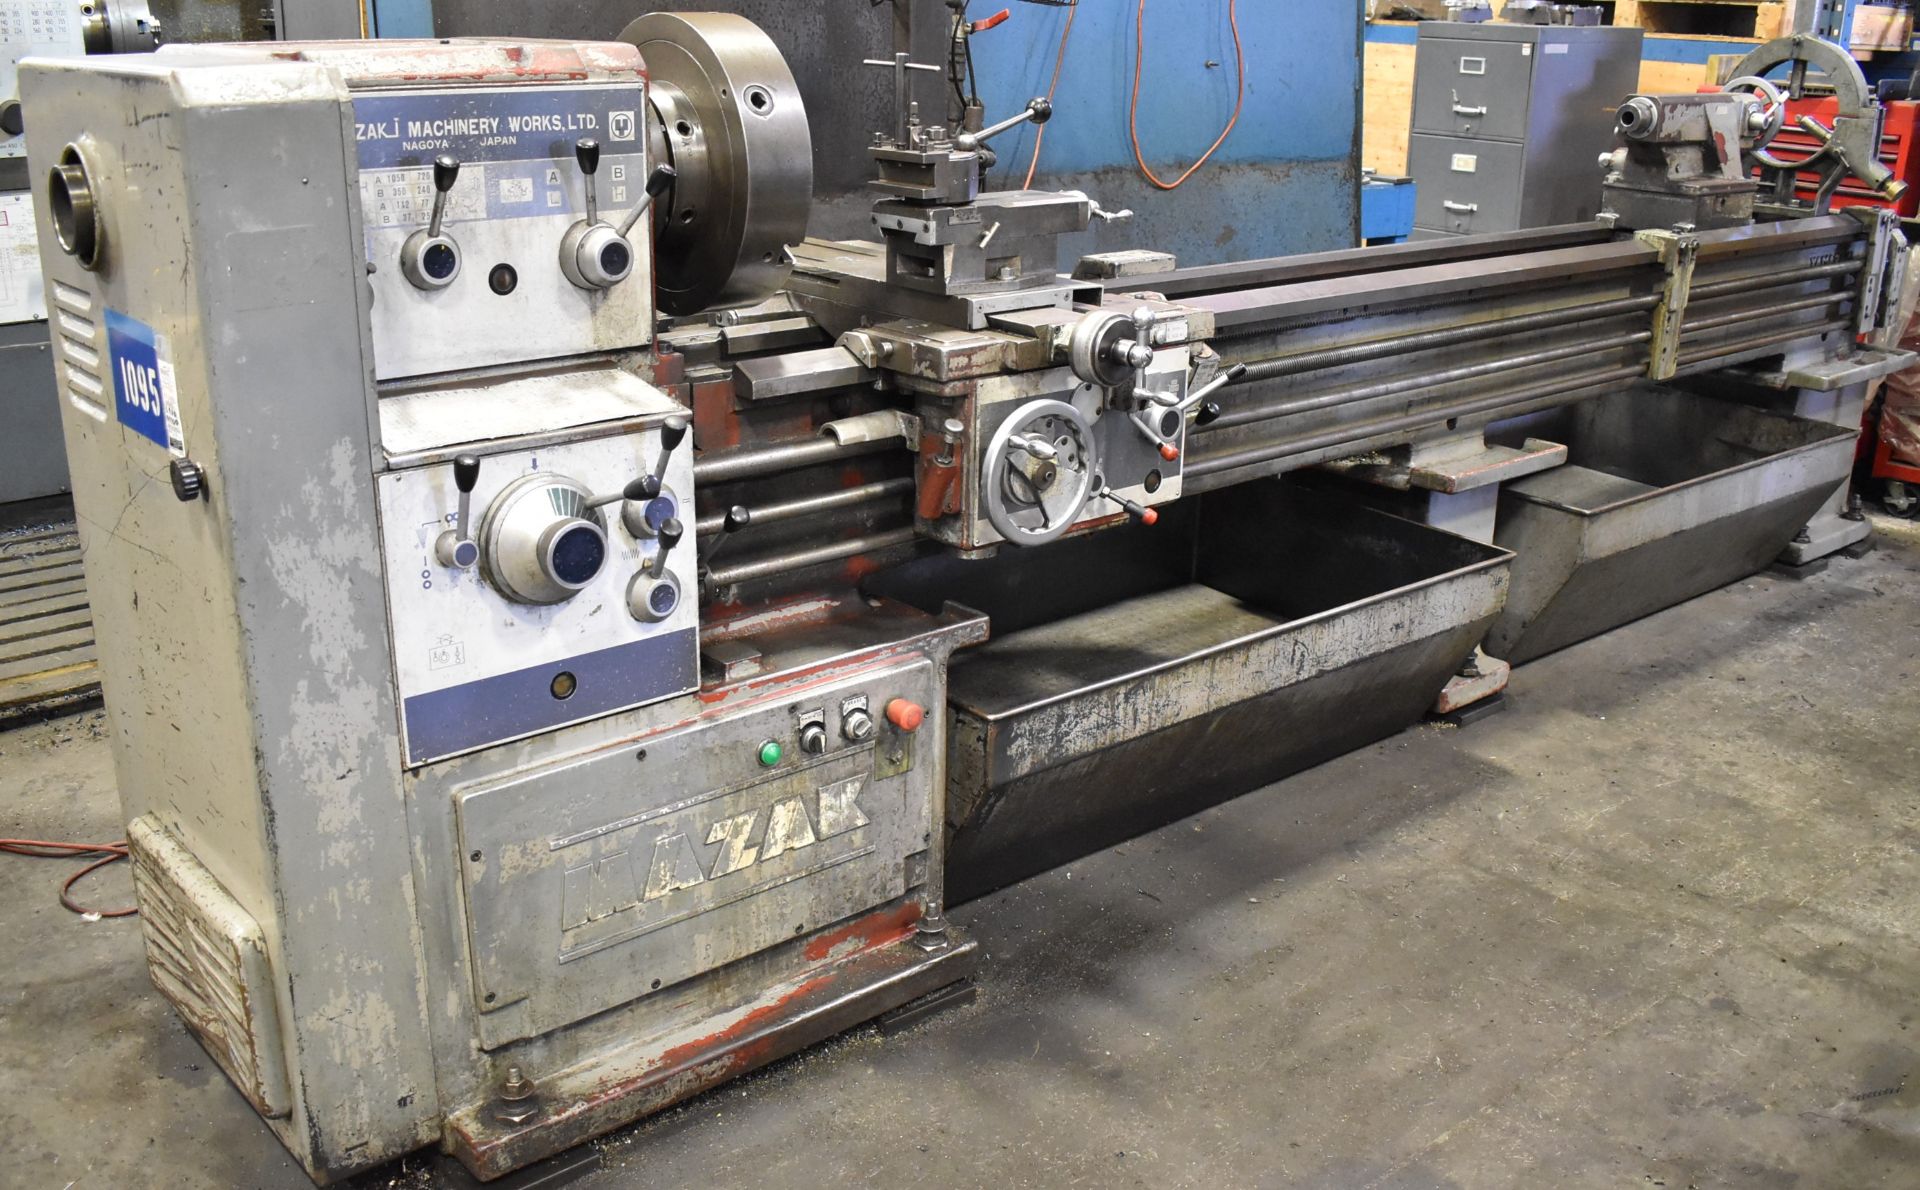 MAZAK GAP BED ENGINE LATHE WITH 20" SWING OVER BED, 126" BETWEEN CENTERS